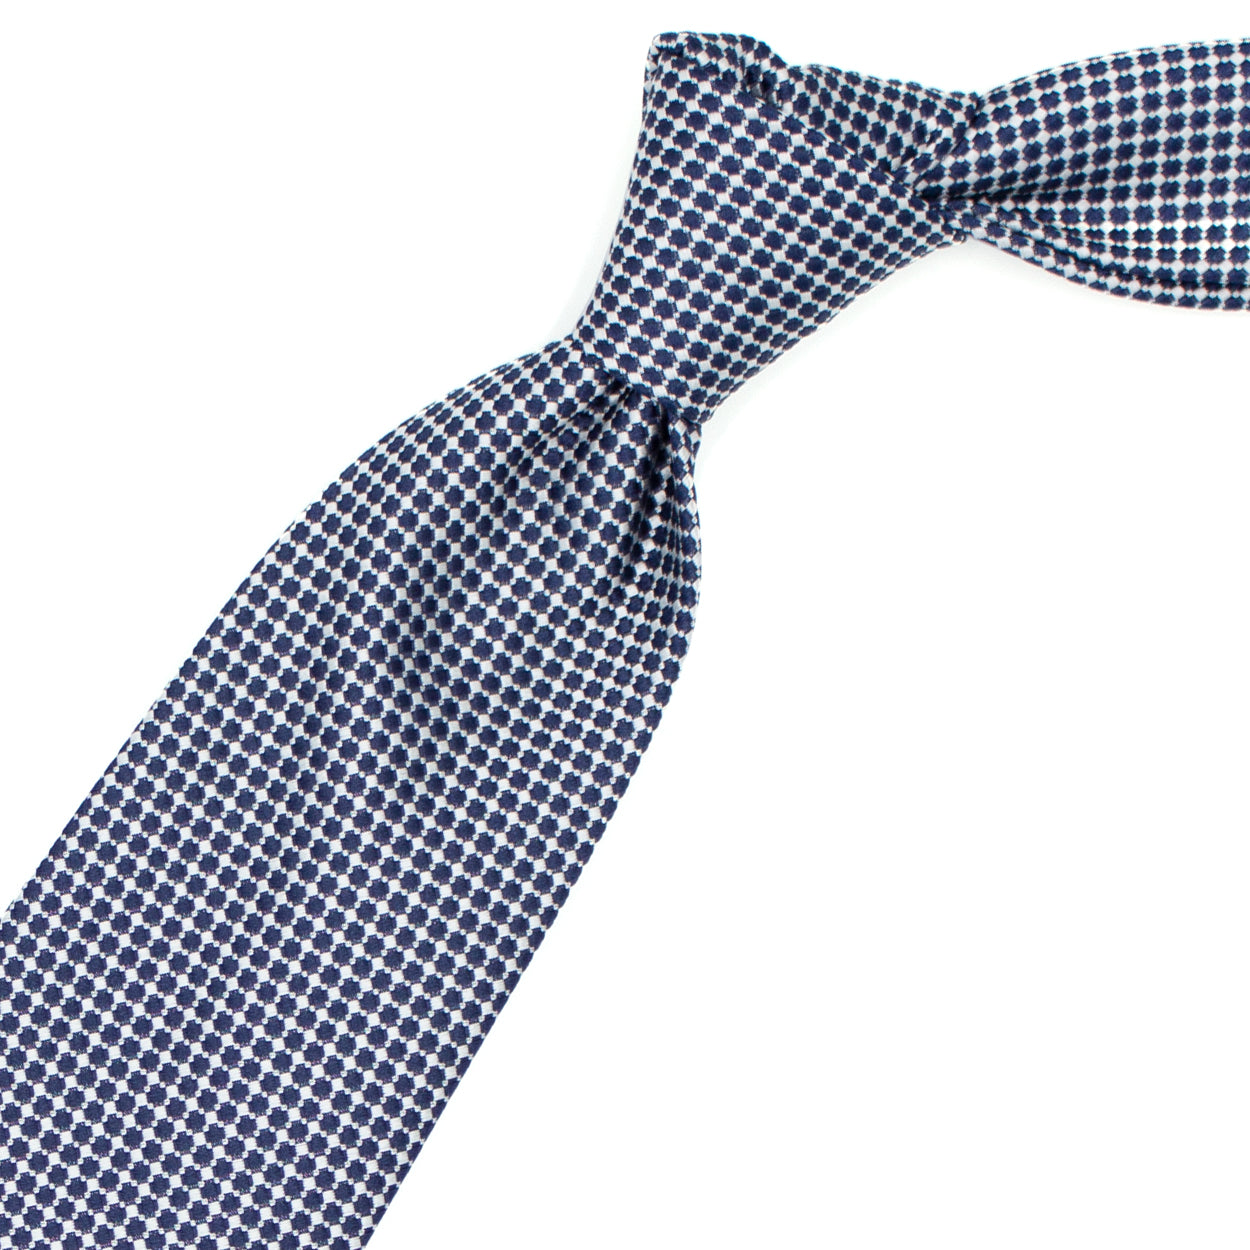 Tie with white and blue squares